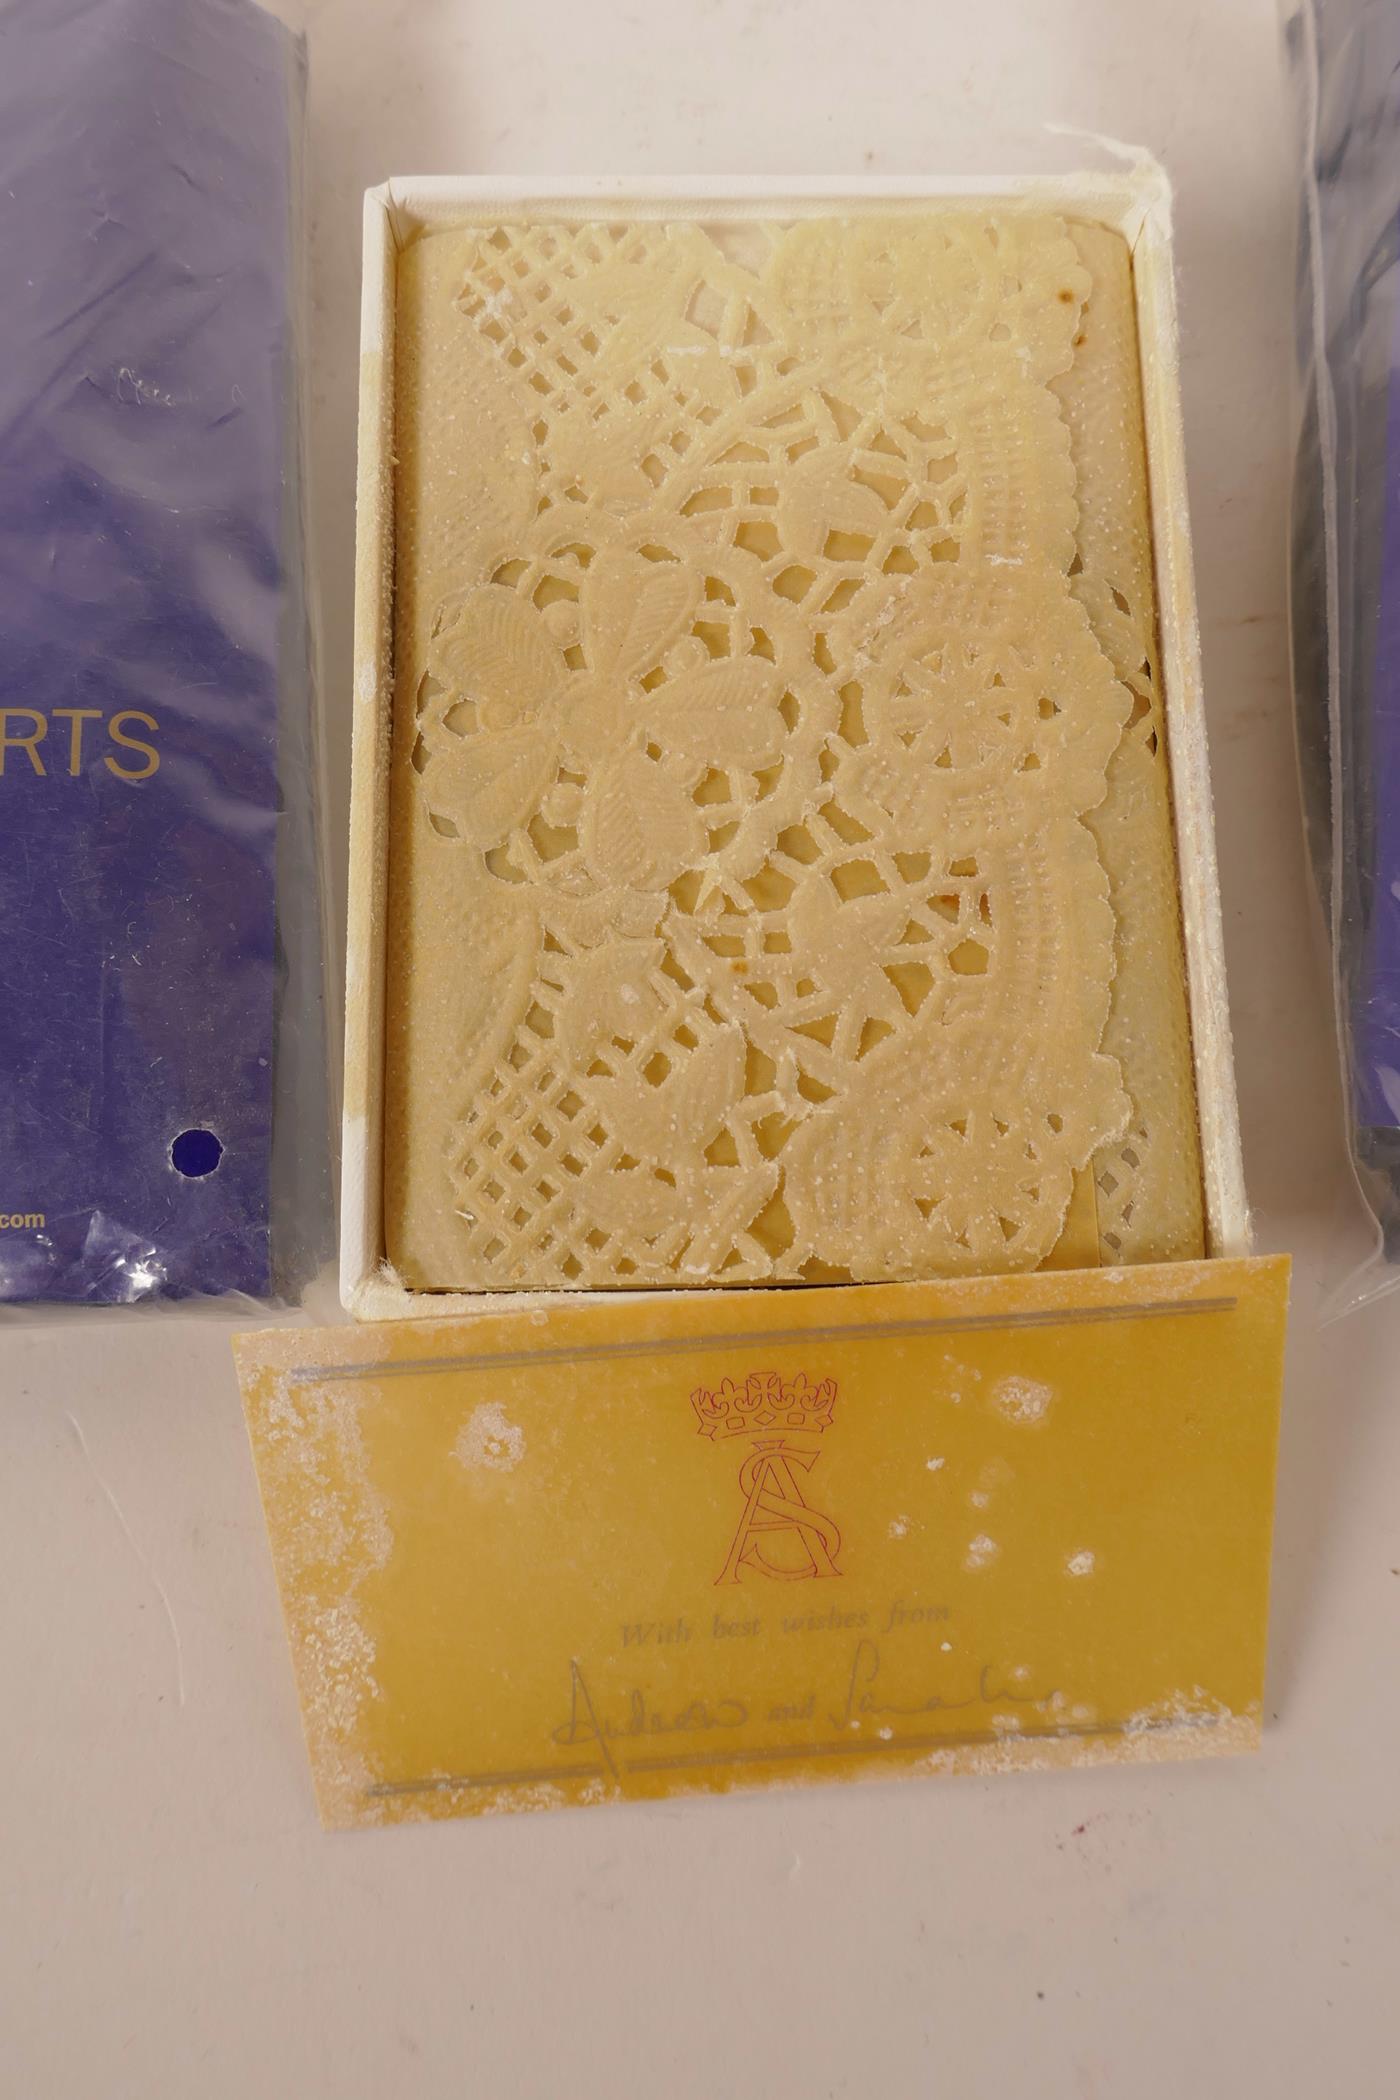 Royal memorabilia, a boxed slice of cake from the wedding of Prince Andrew and Sarah Ferguson, - Image 3 of 3